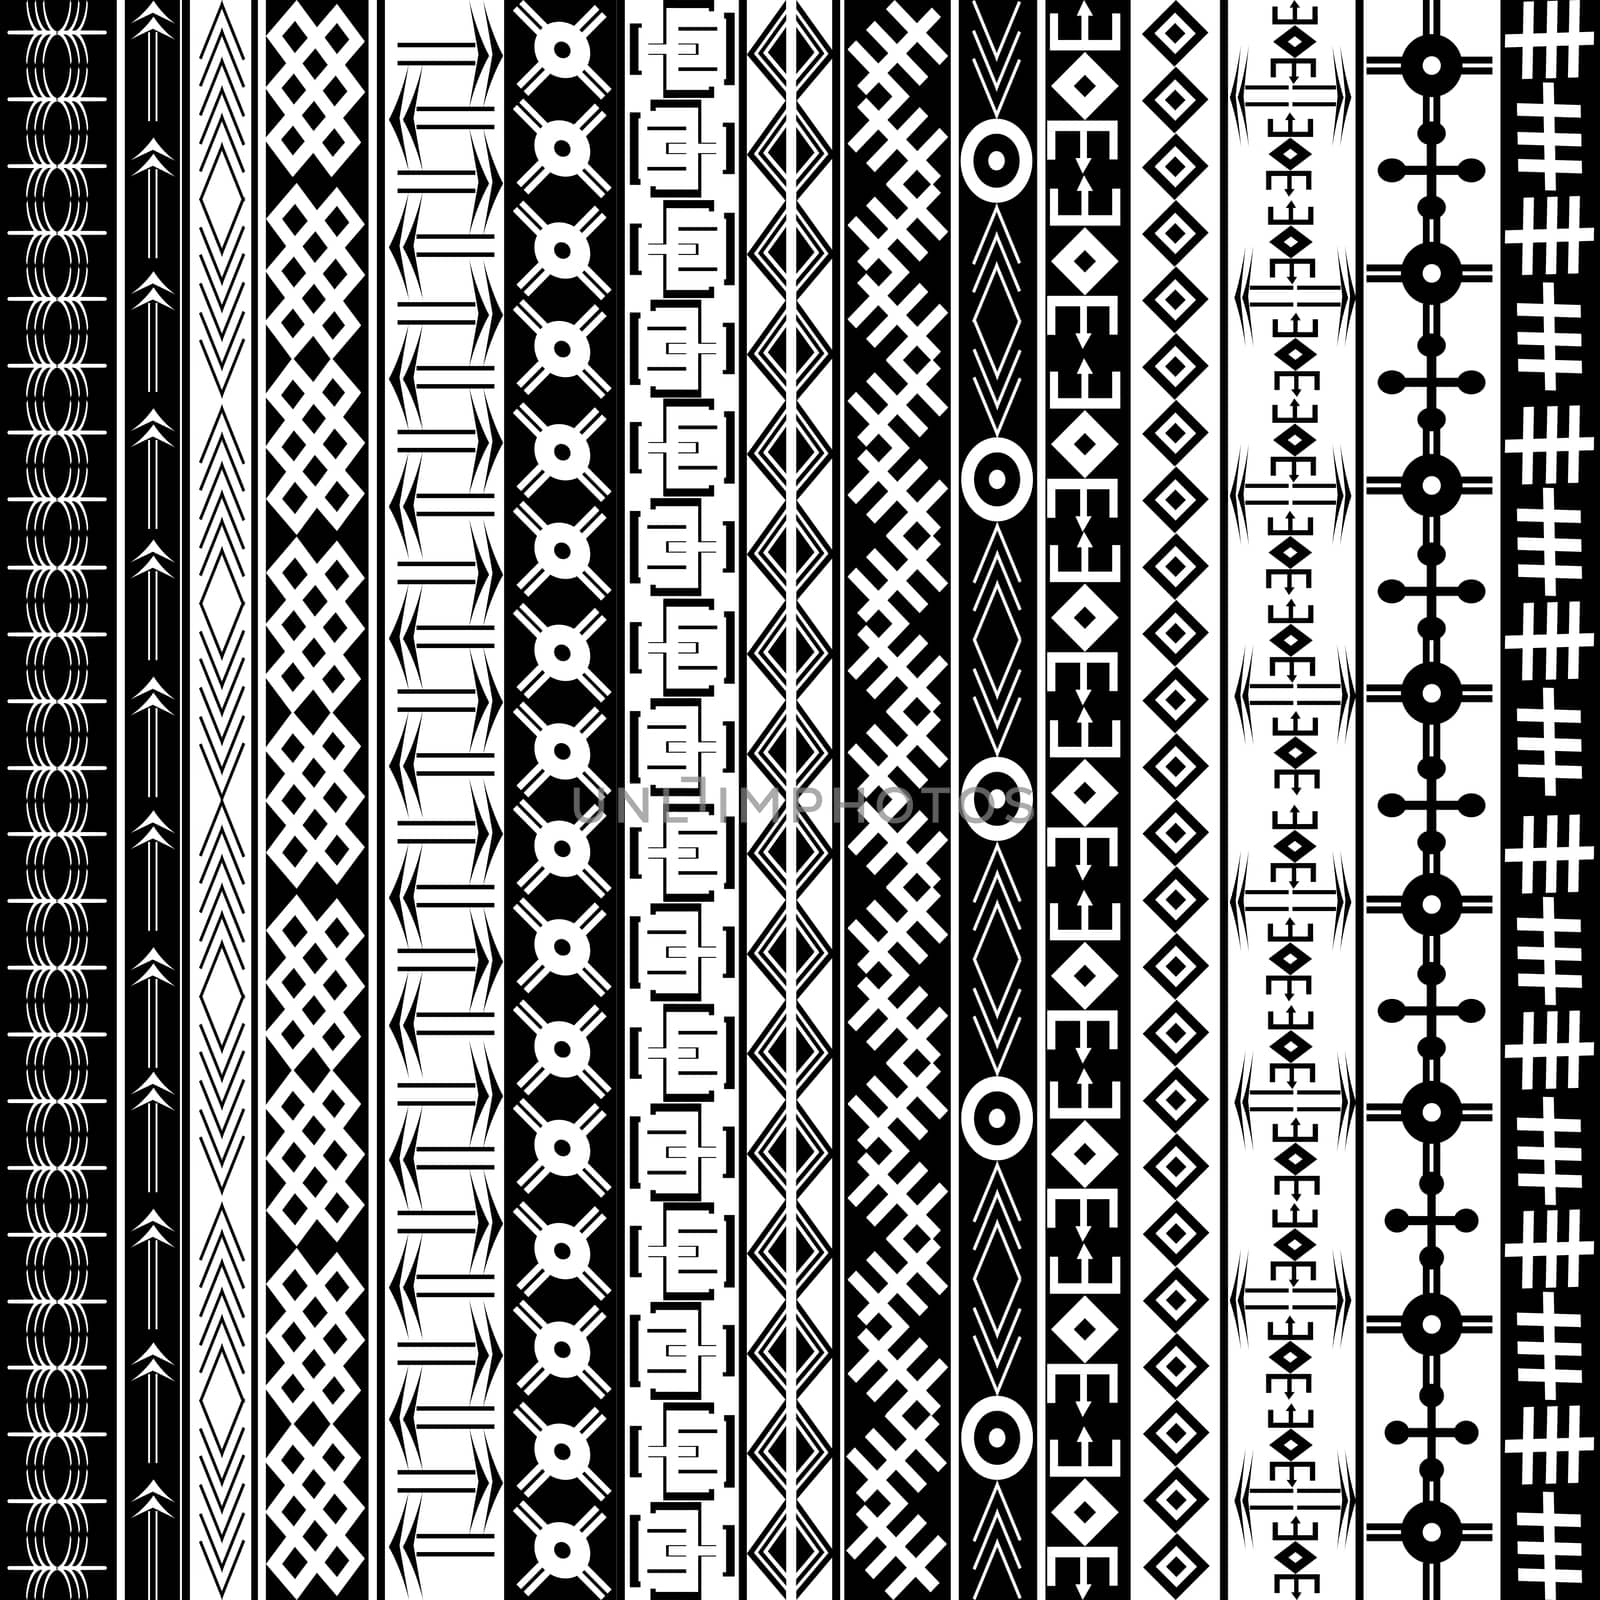 Texture with ethnic geometrical ornaments, black and white African motifs background